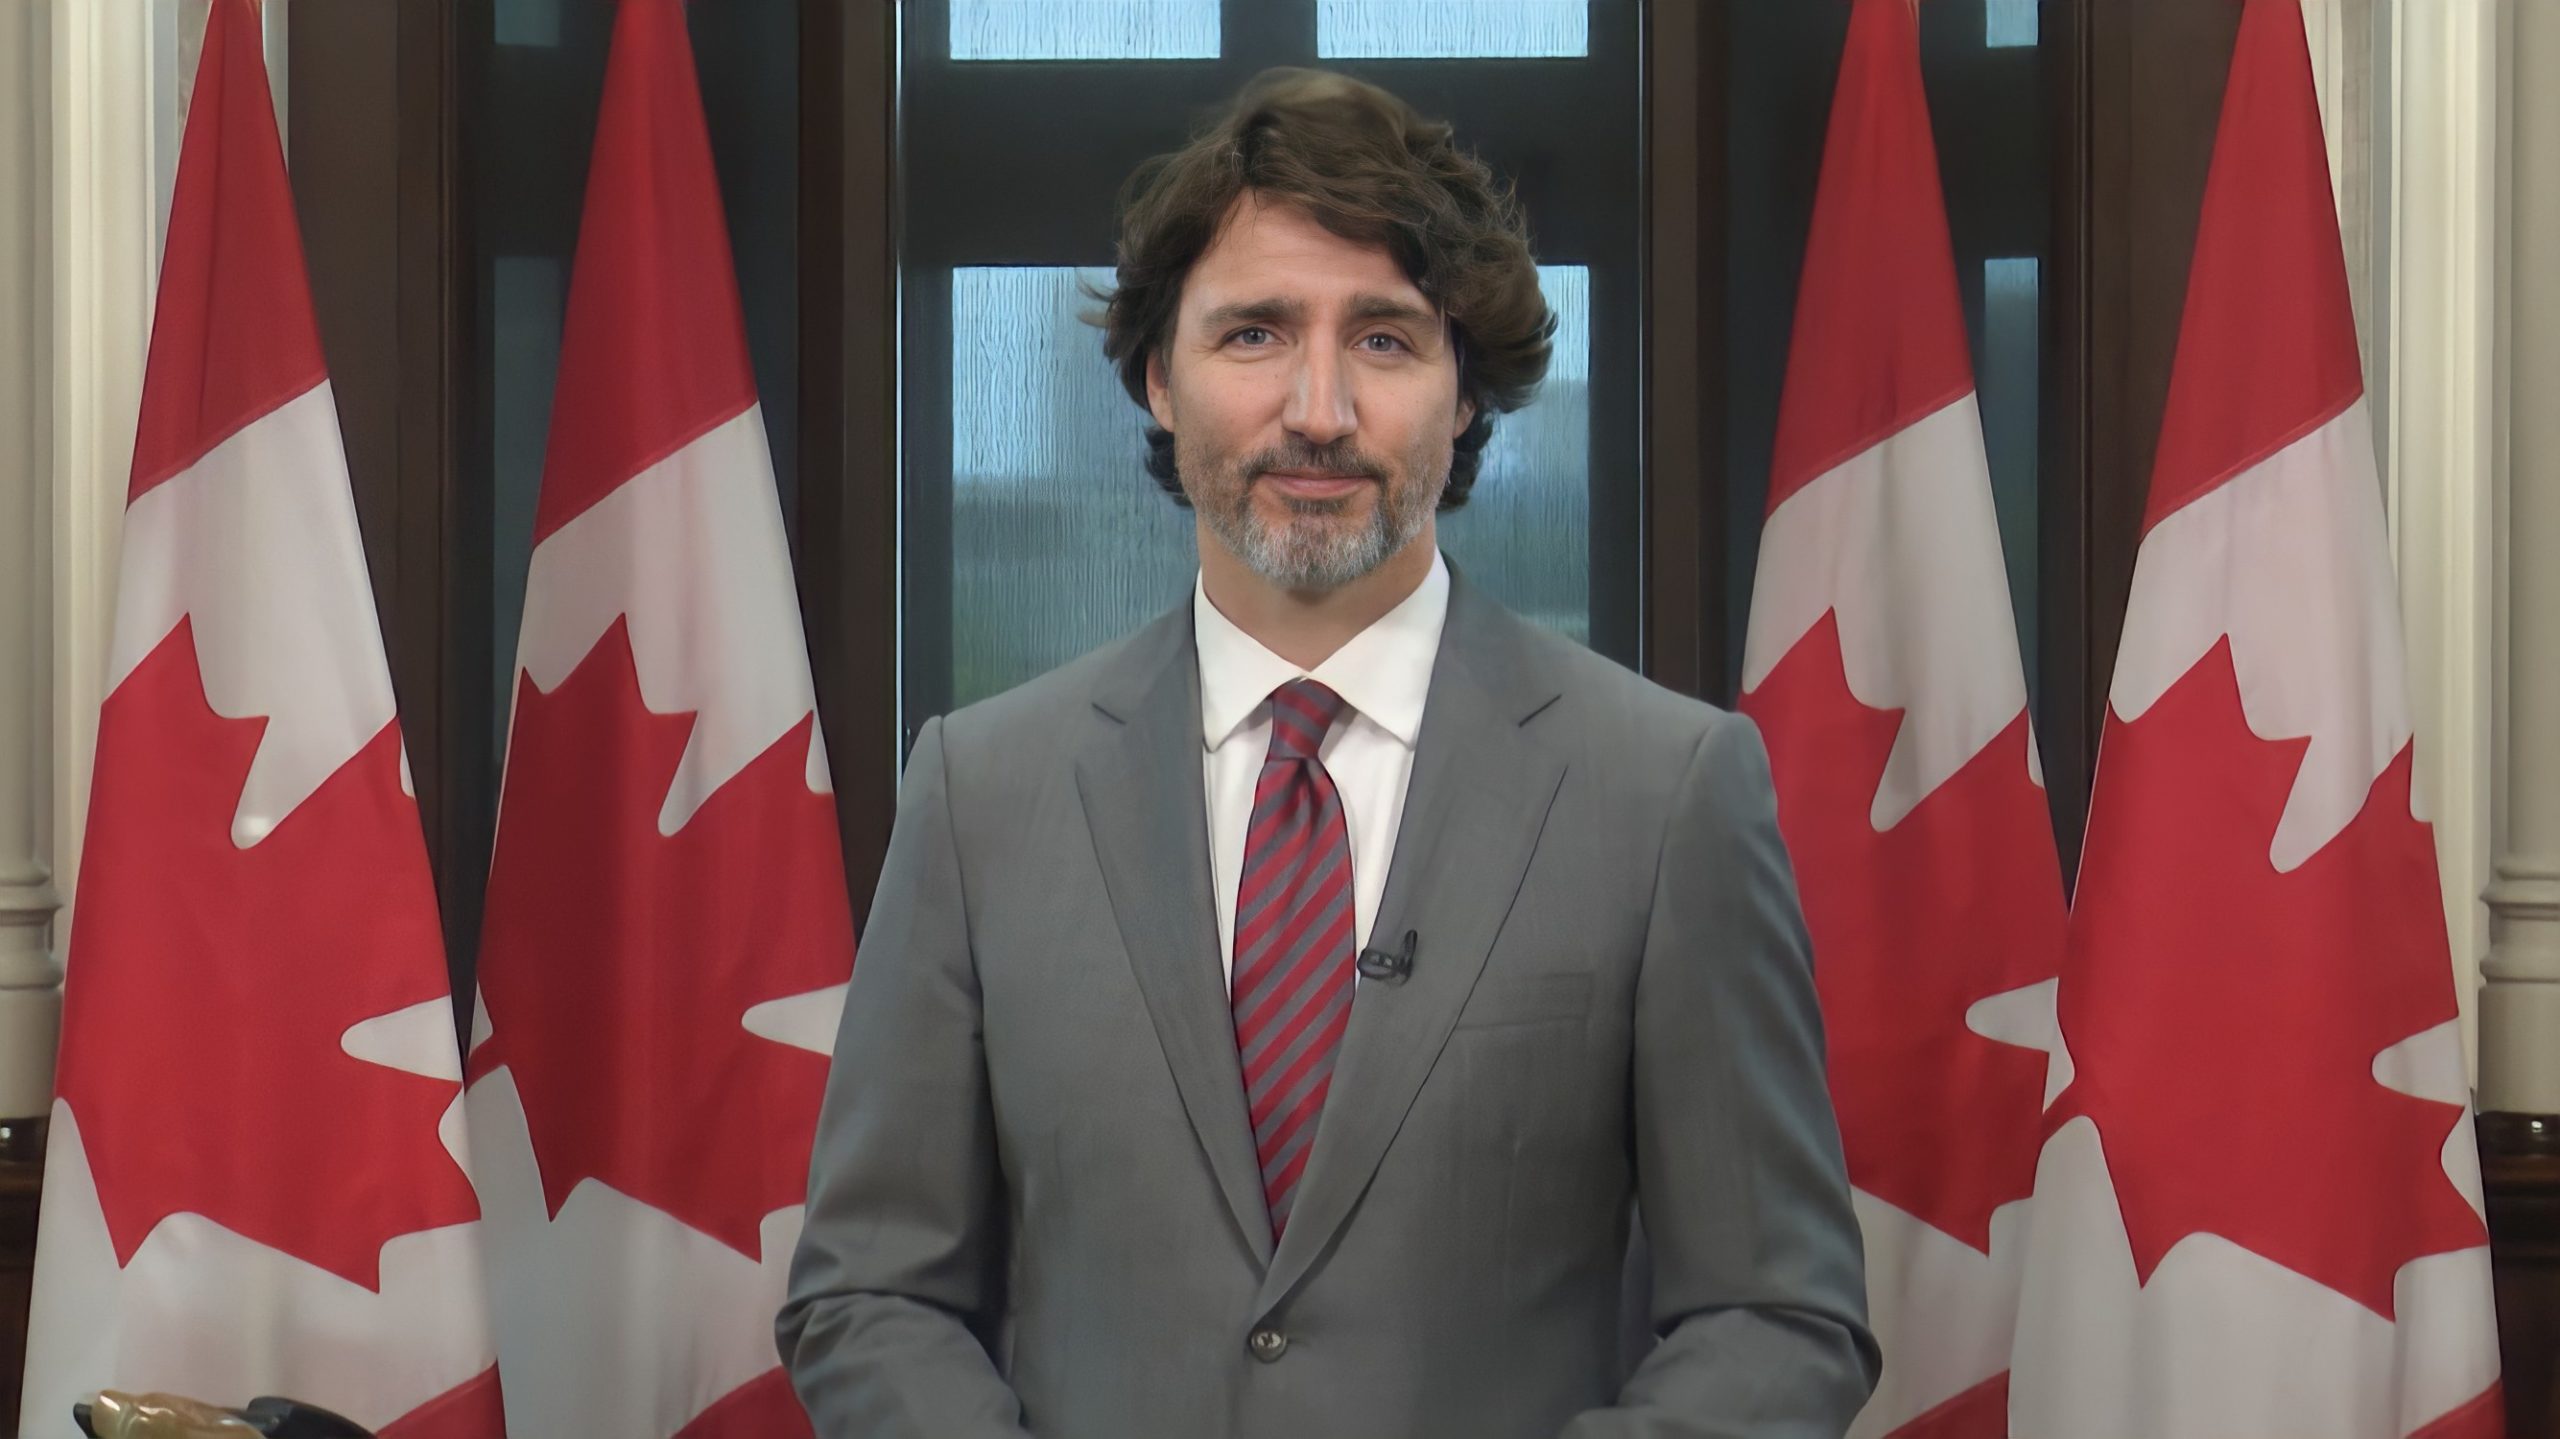 Prime Minsiter TrudeauIt Spoke At His First News Conference Regarding The “Freedom Convoy” & Says “Canadians Have A Right To Protest But They Don’t Have A Right To Threaten Or Intimidate Others”